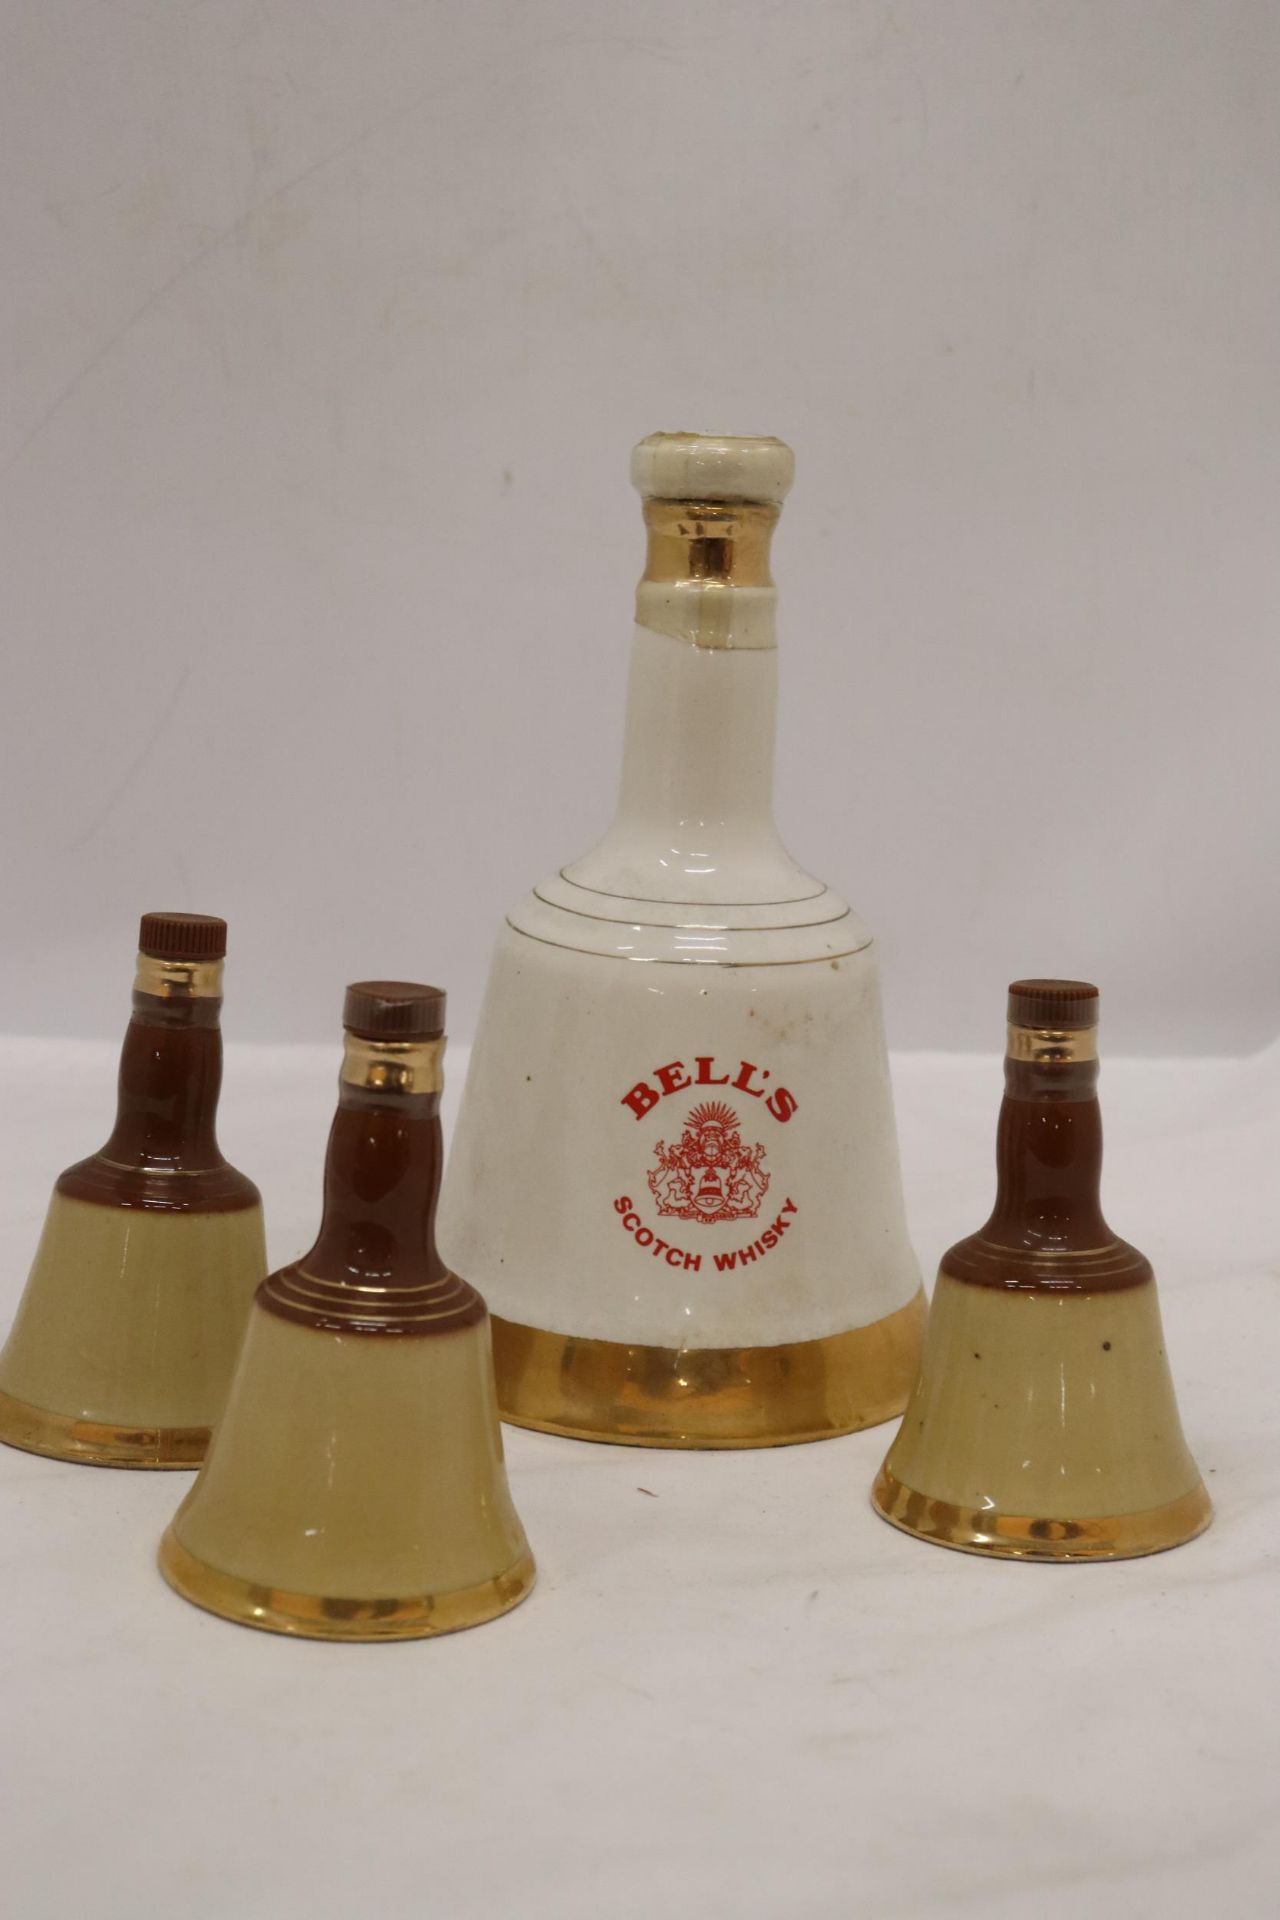 ONE LARGE AND THREE SMALL, BELL'S WHISKY CERAMIC DECANTERS - Image 3 of 4